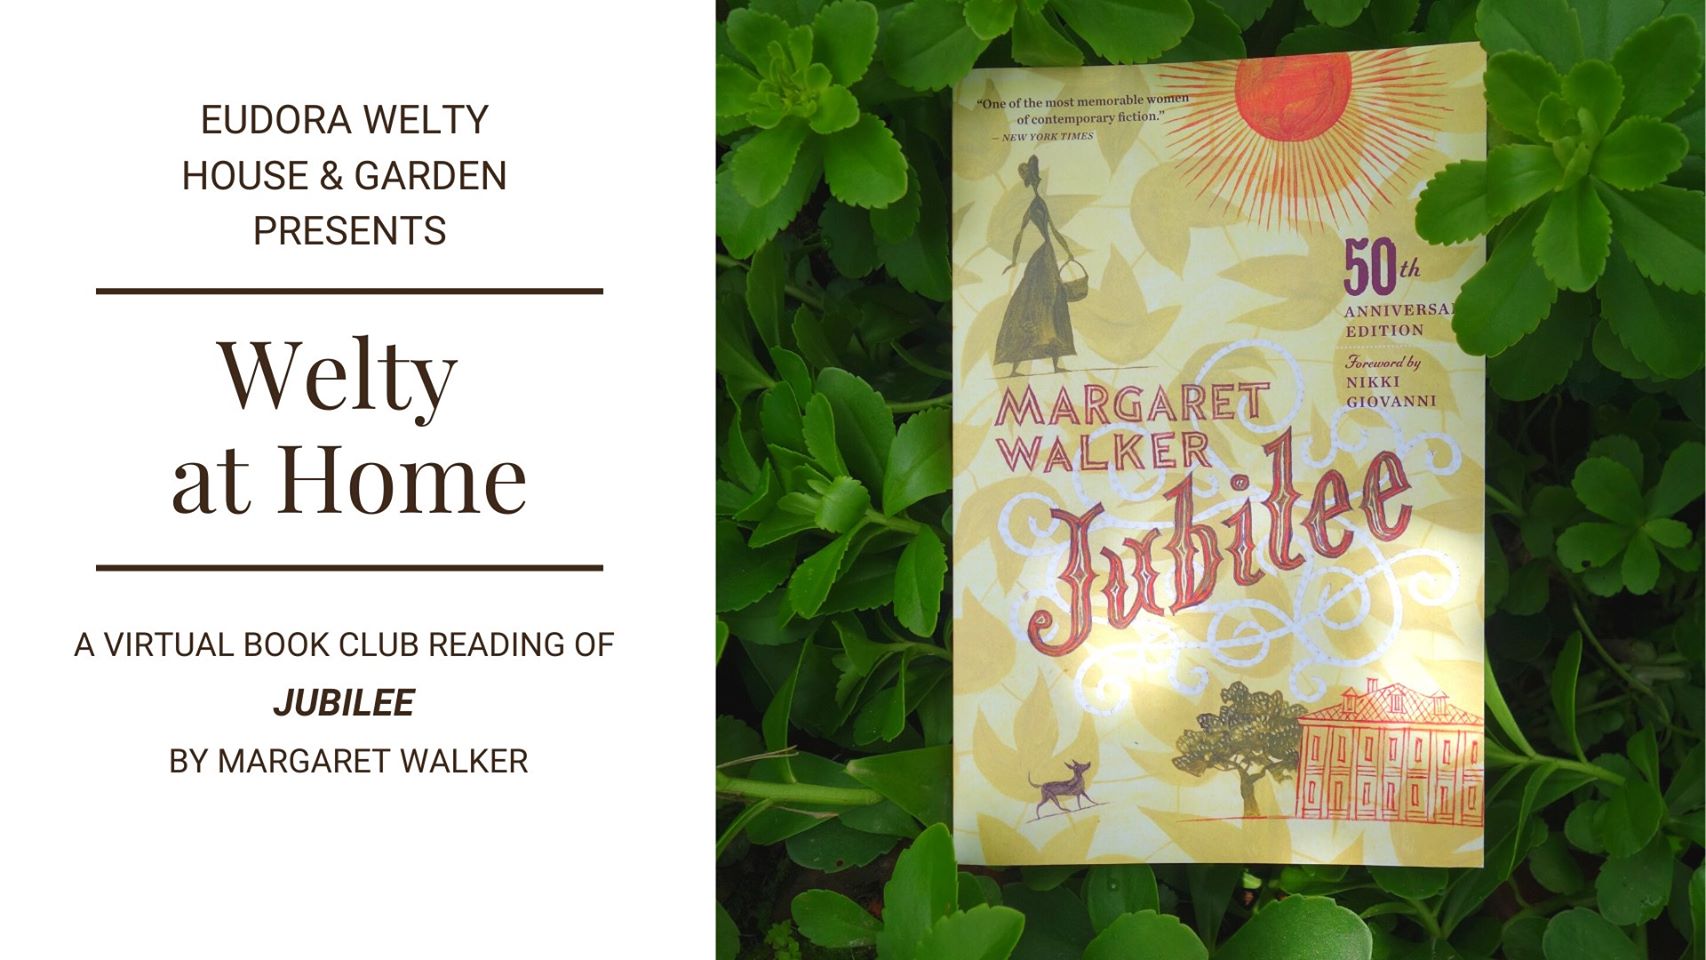 Cover of Jubilee book by Margaret Walker surrounded by greenery beside text graphic with book club details